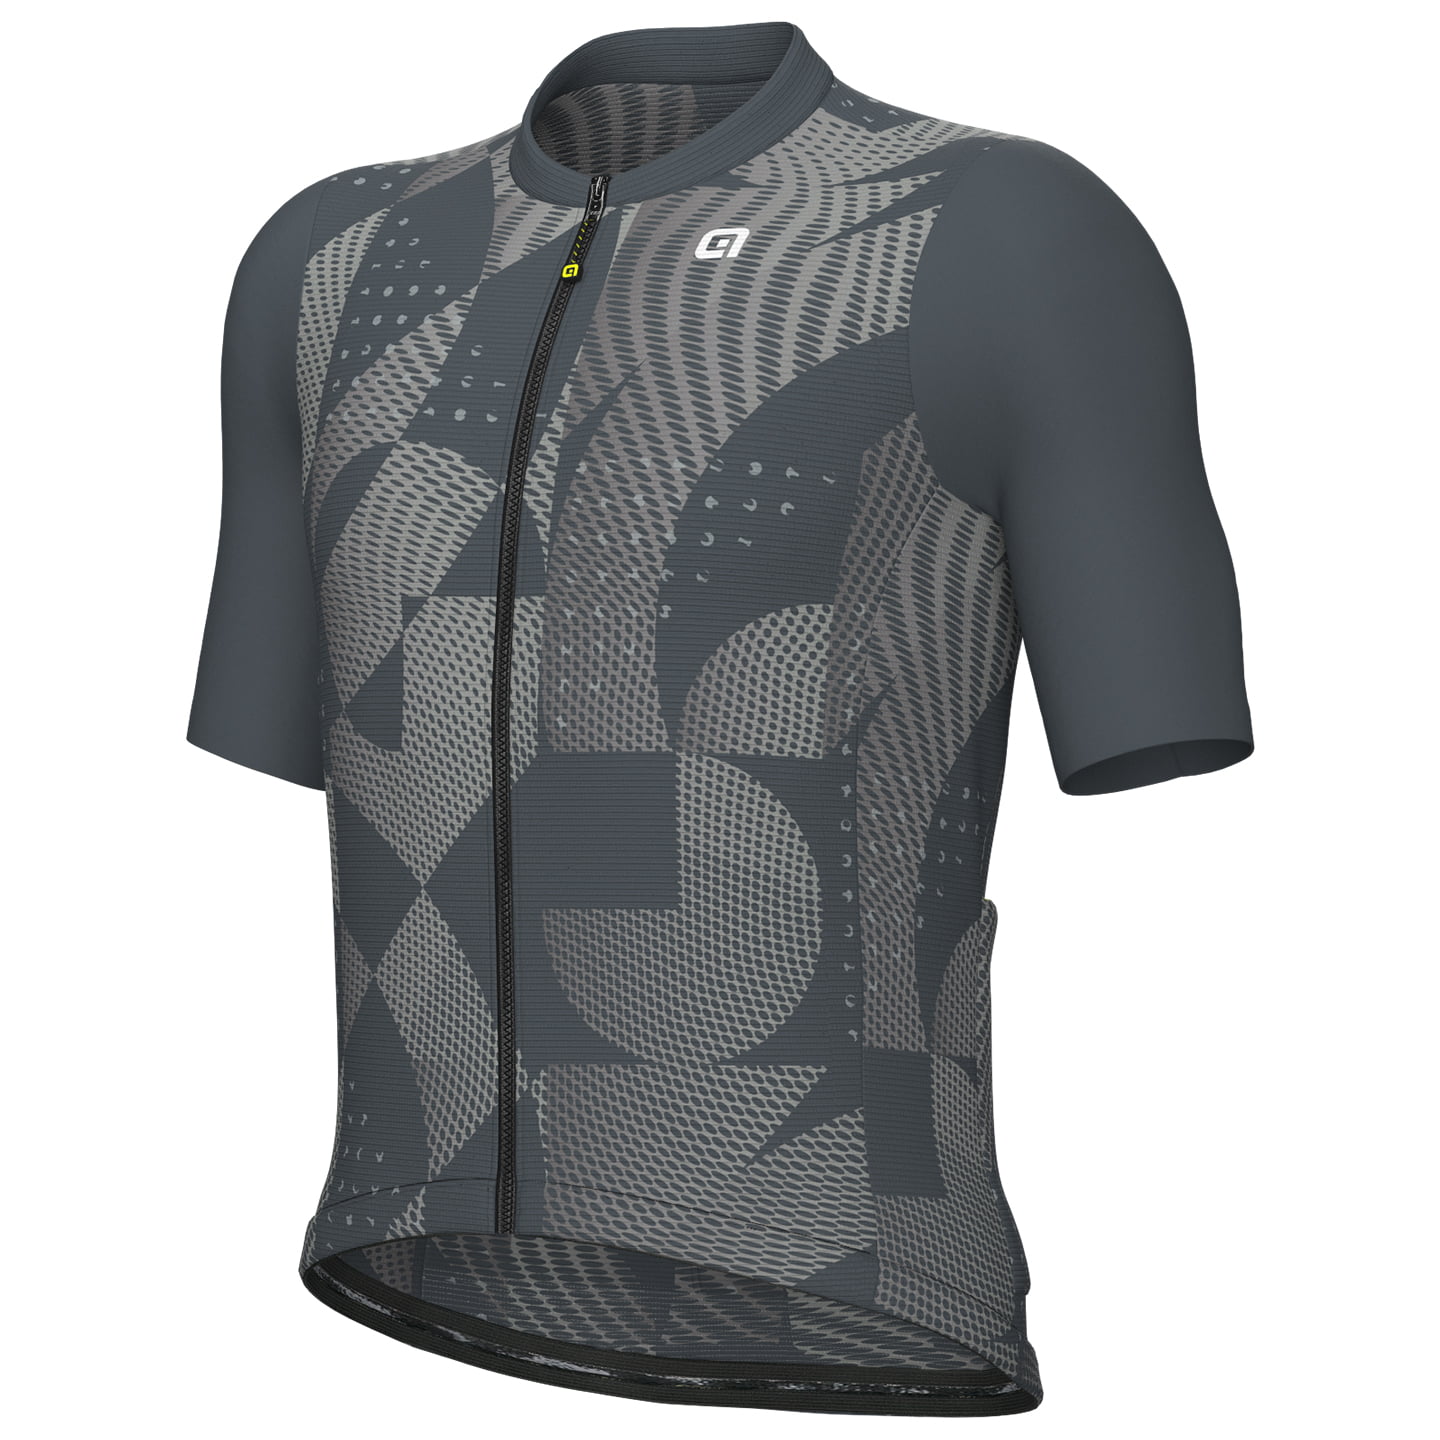 ALE Enjoy Short Sleeve Jersey, for men, size XL, Cycling jersey, Cycle clothing